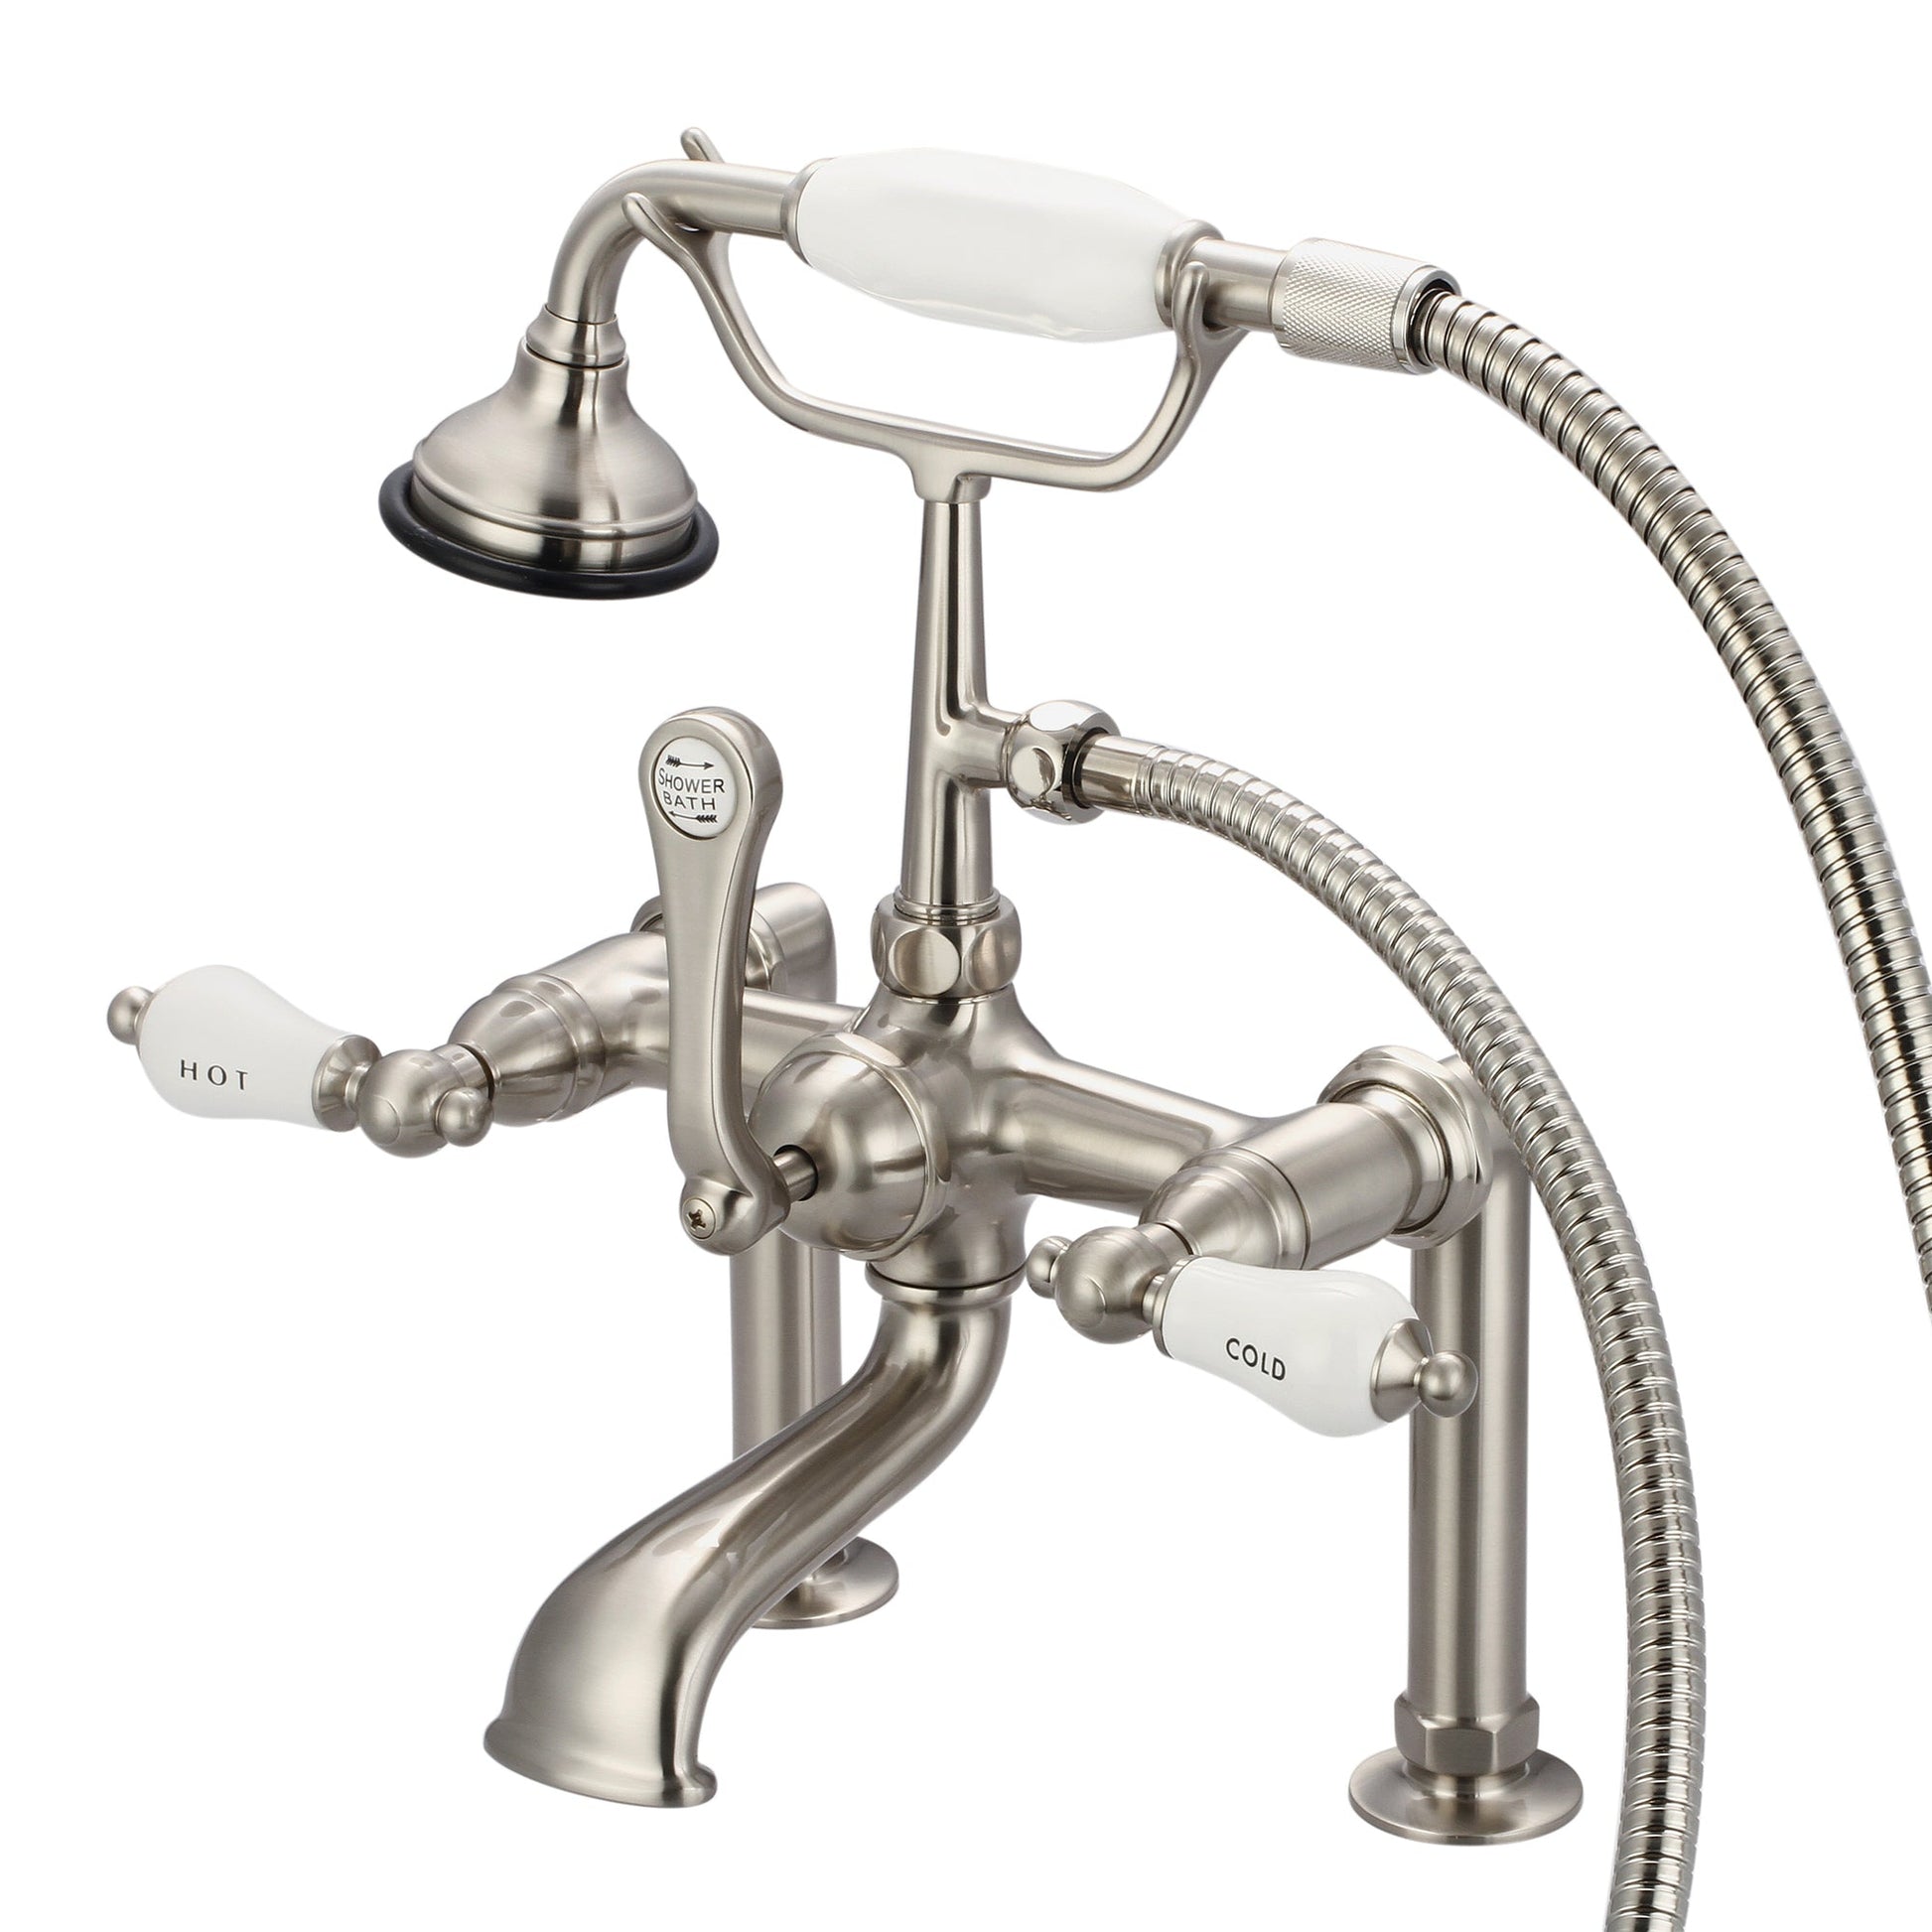 Water Creation Vintage Classic Spread Deck Mount Tub F6-0006 7" Grey Solid Brass Faucet With 6-Inch Risers And Handheld Shower And Porcelain Lever Handles, Hot And Cold Labels Included